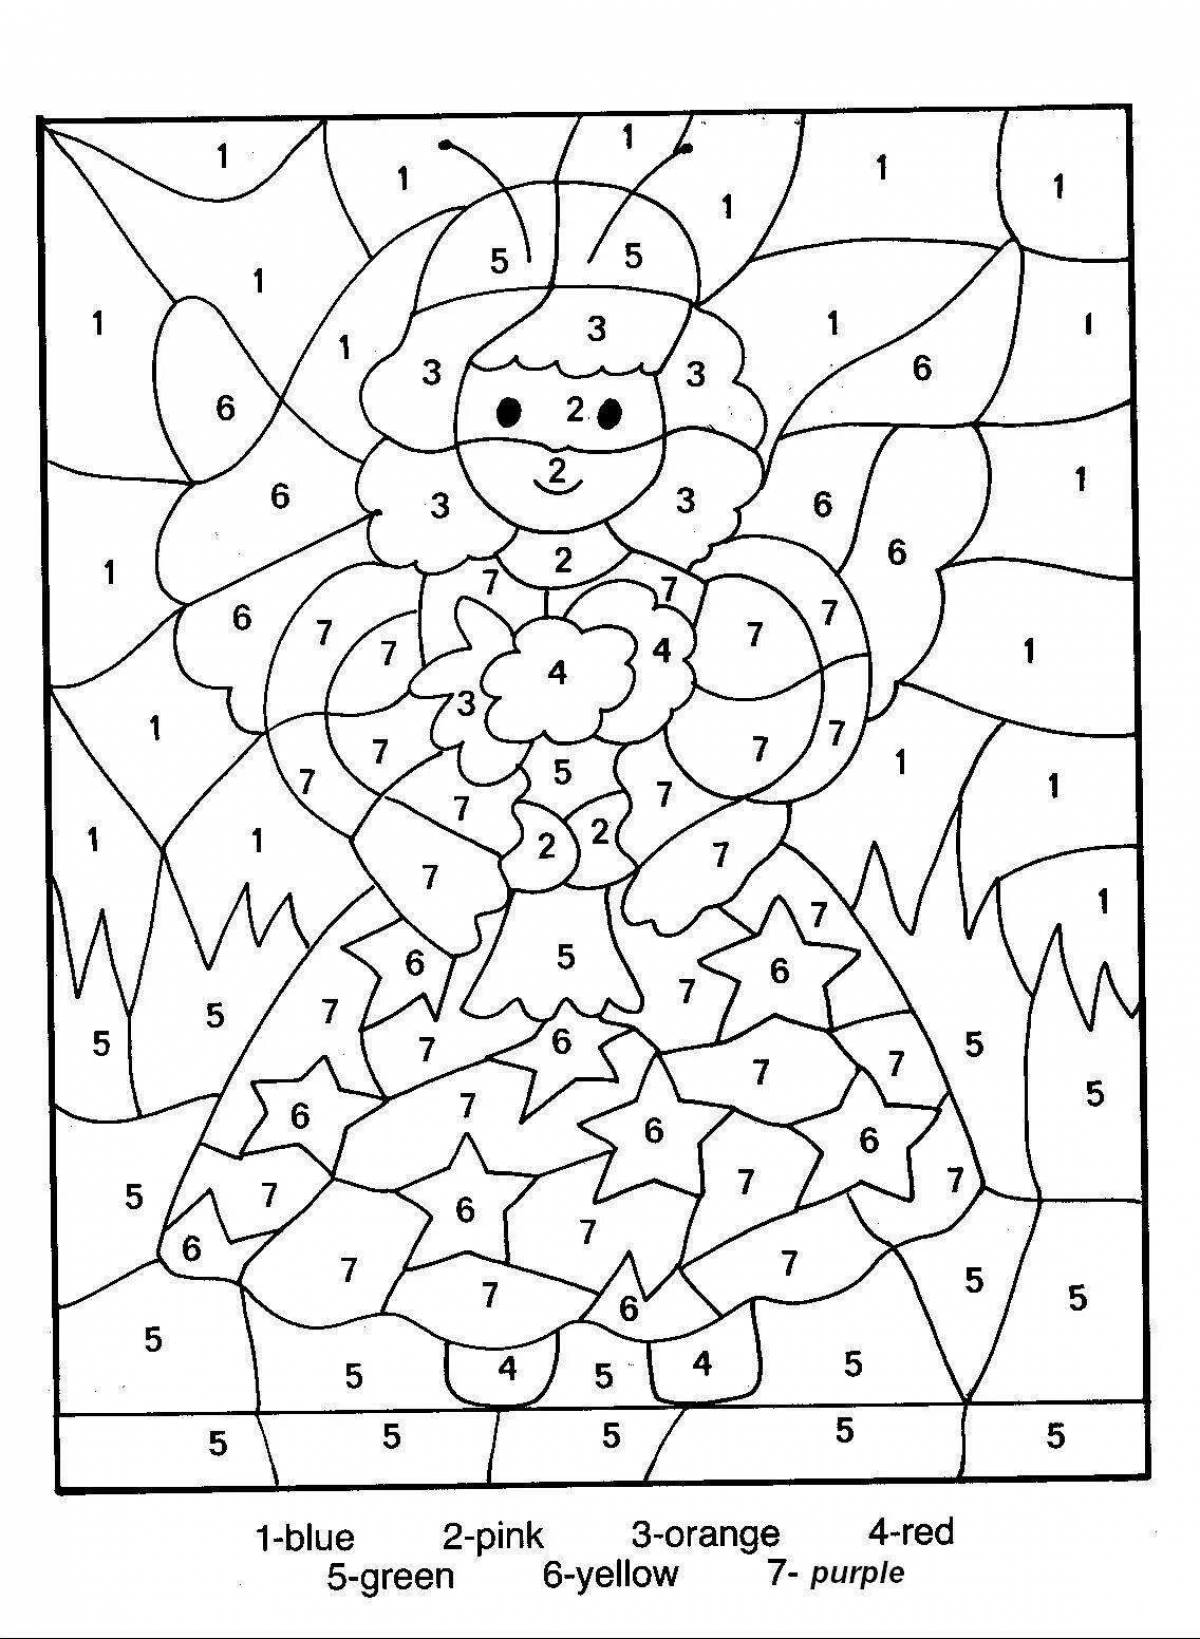 Fun coloring by numbers for kids 5-7 years old